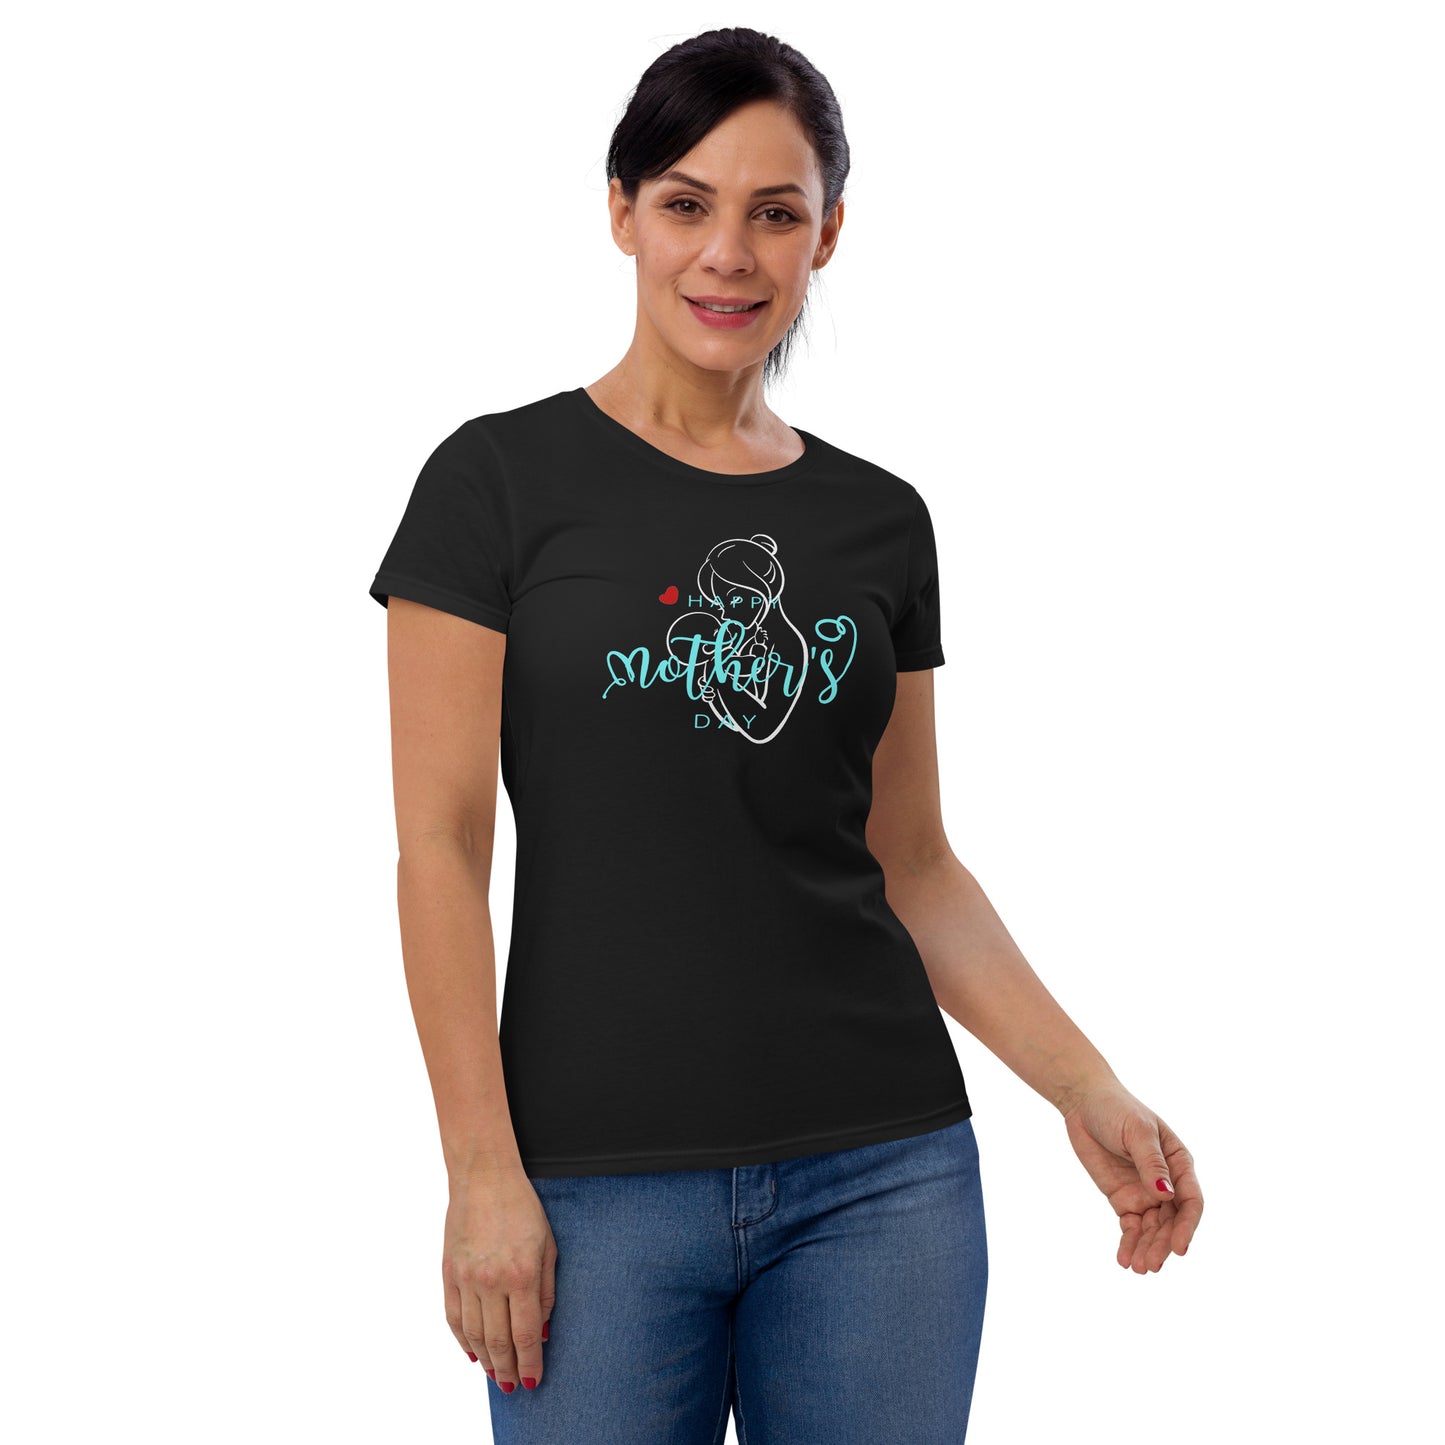 Mother's Pride t-shirt